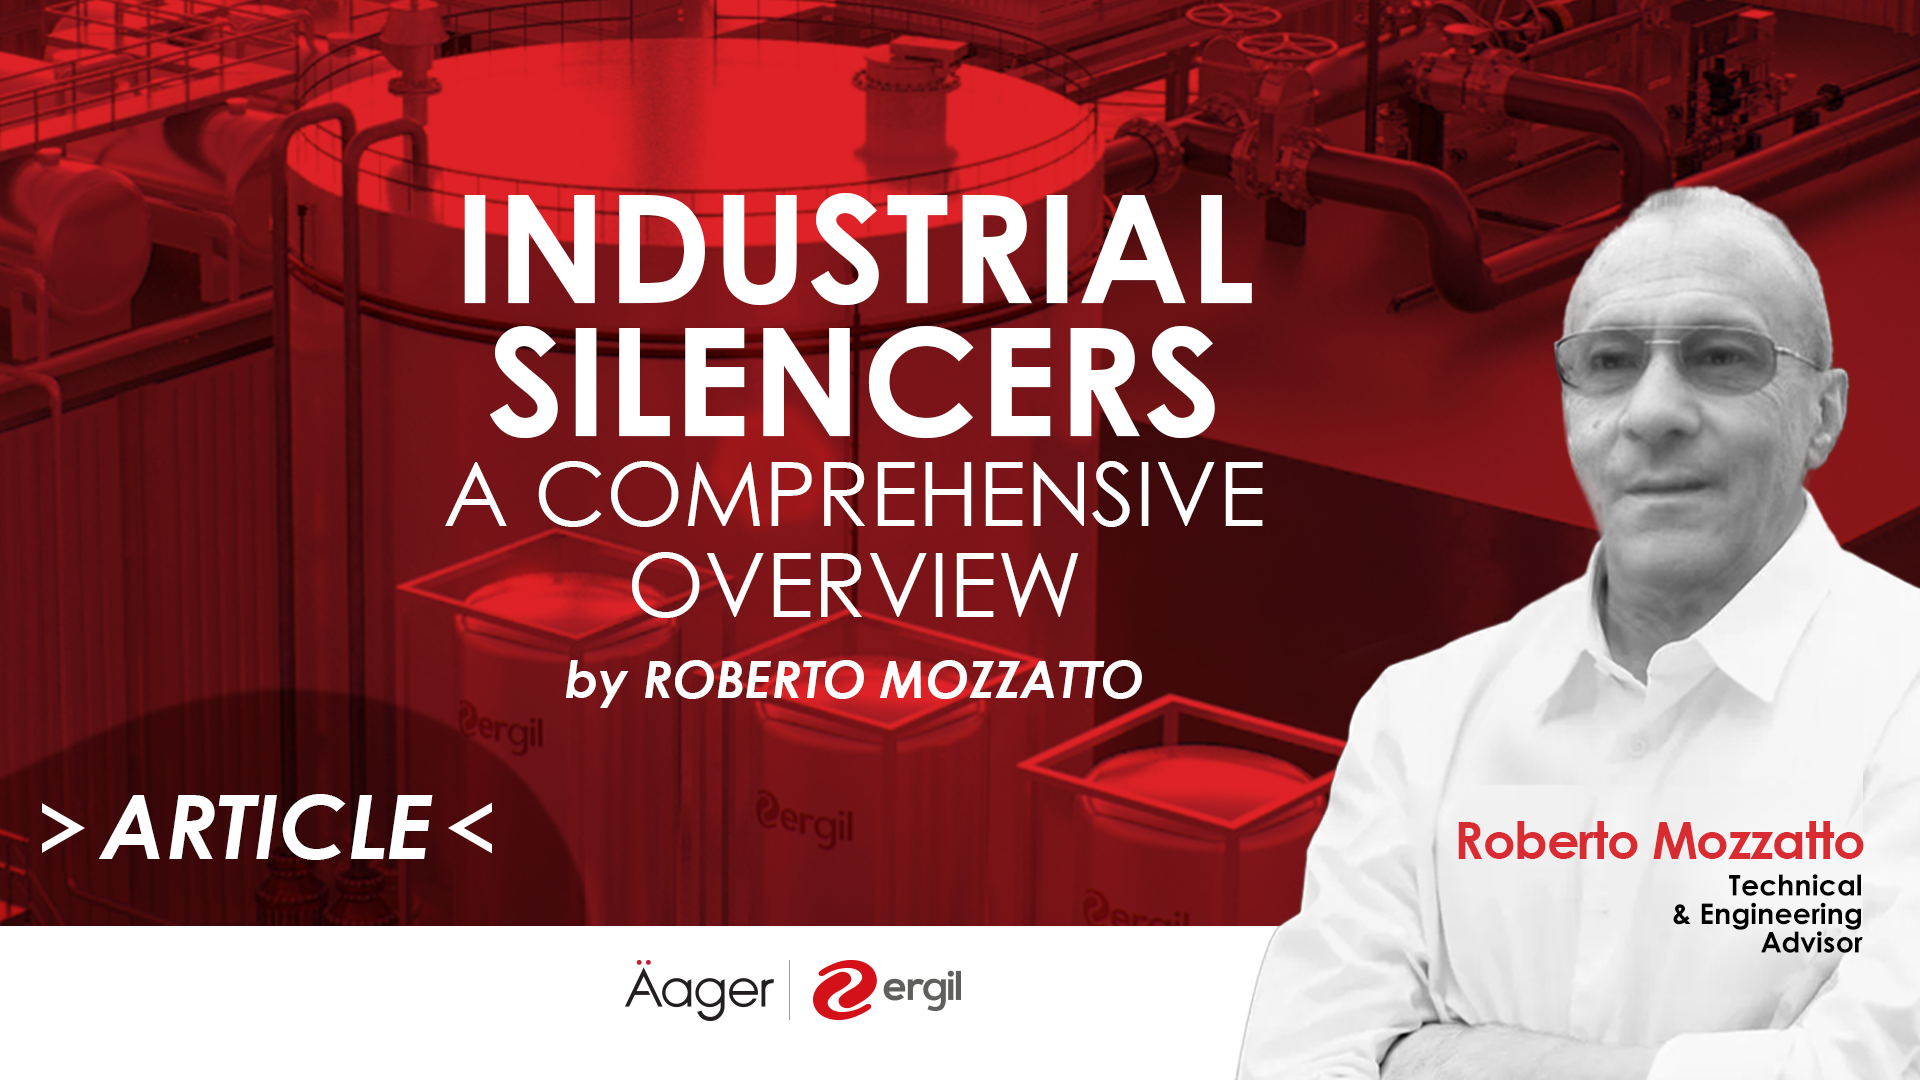 Industrial Silencers: A Comprehensive Overview with Roberto Mozzatto 36